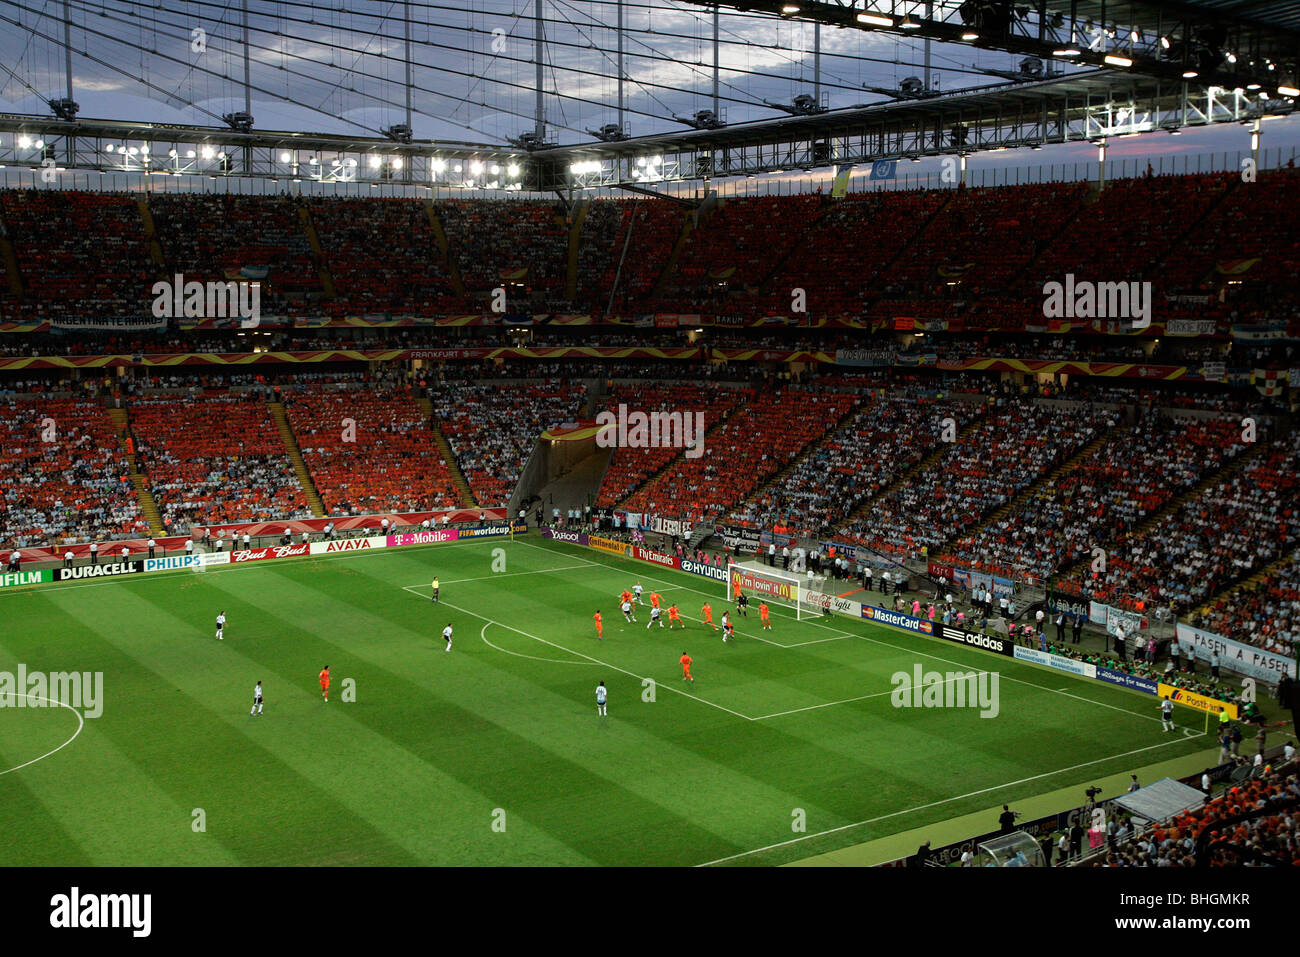 View inside the Waldstadion or Commerzbank-Arena, Frankfurt, Germany during a match at the 2006 World Cup Finals Stock Photo